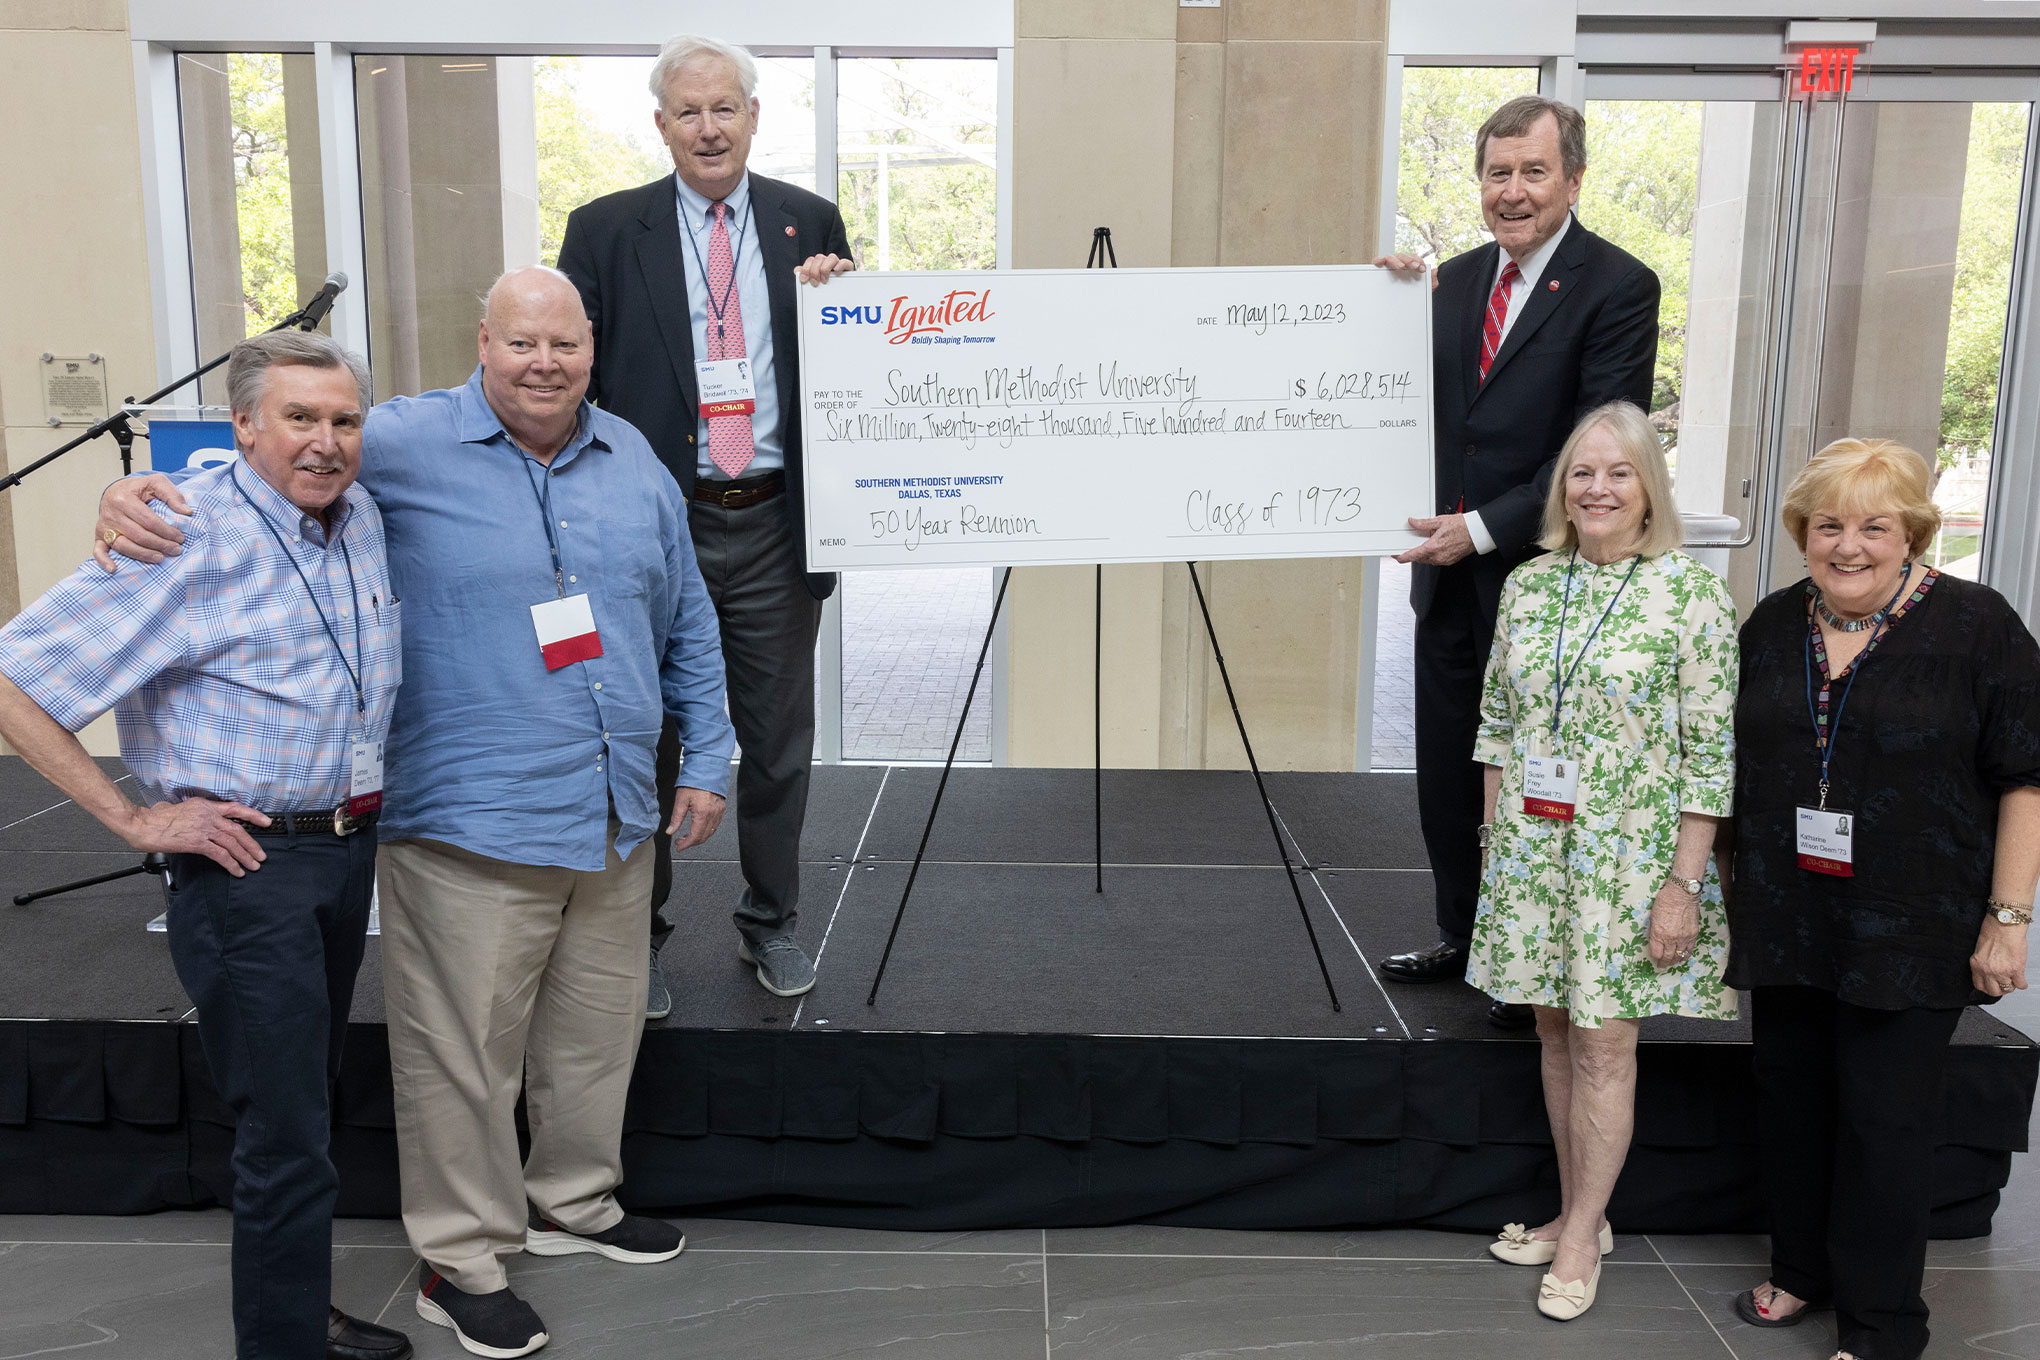 Members of the Class of 1973 present a check to SMU President R. Gerald Turner